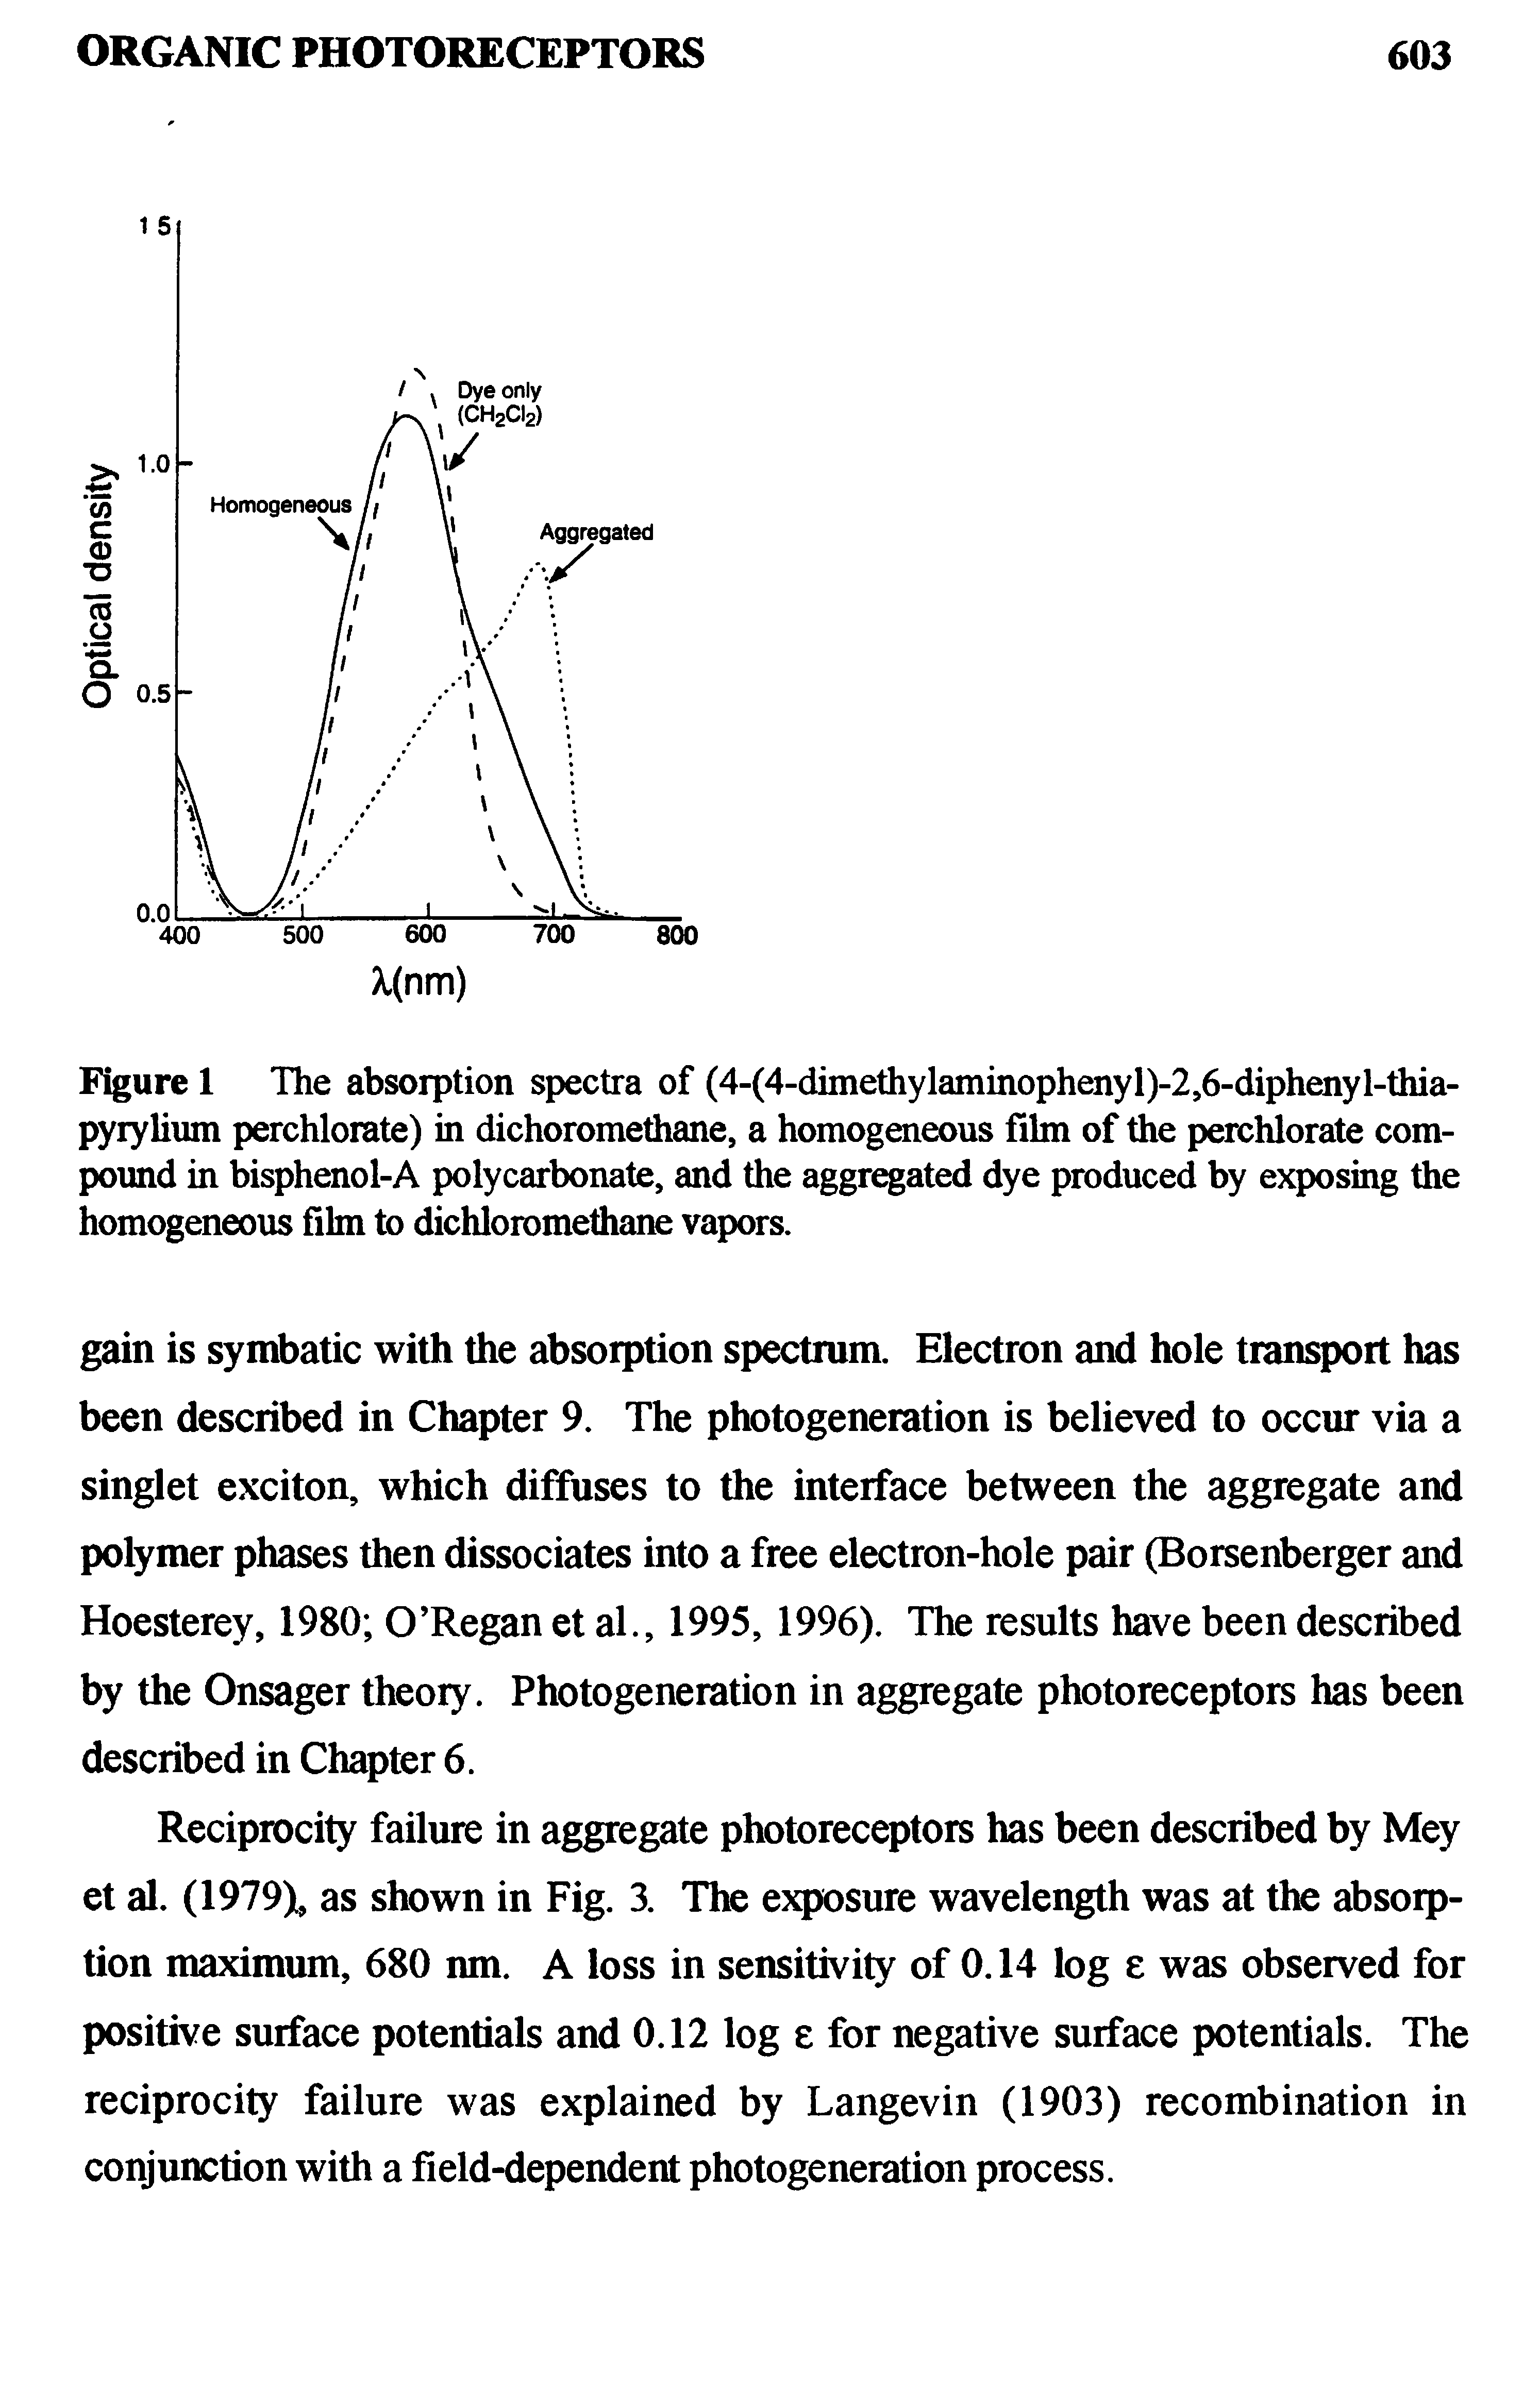 Figure 1 The absorption spectra of (4-(4-dimethylaminophenyl)-2,6-diphenyl-thia-pyrylium perchlorate) in dichoromethane, a homogeneous film of the perchlorate compound in bisphenol-A polycarbonate, and the aggregated dye produced by exposing the homogeneous film to dichloromethane vapors.